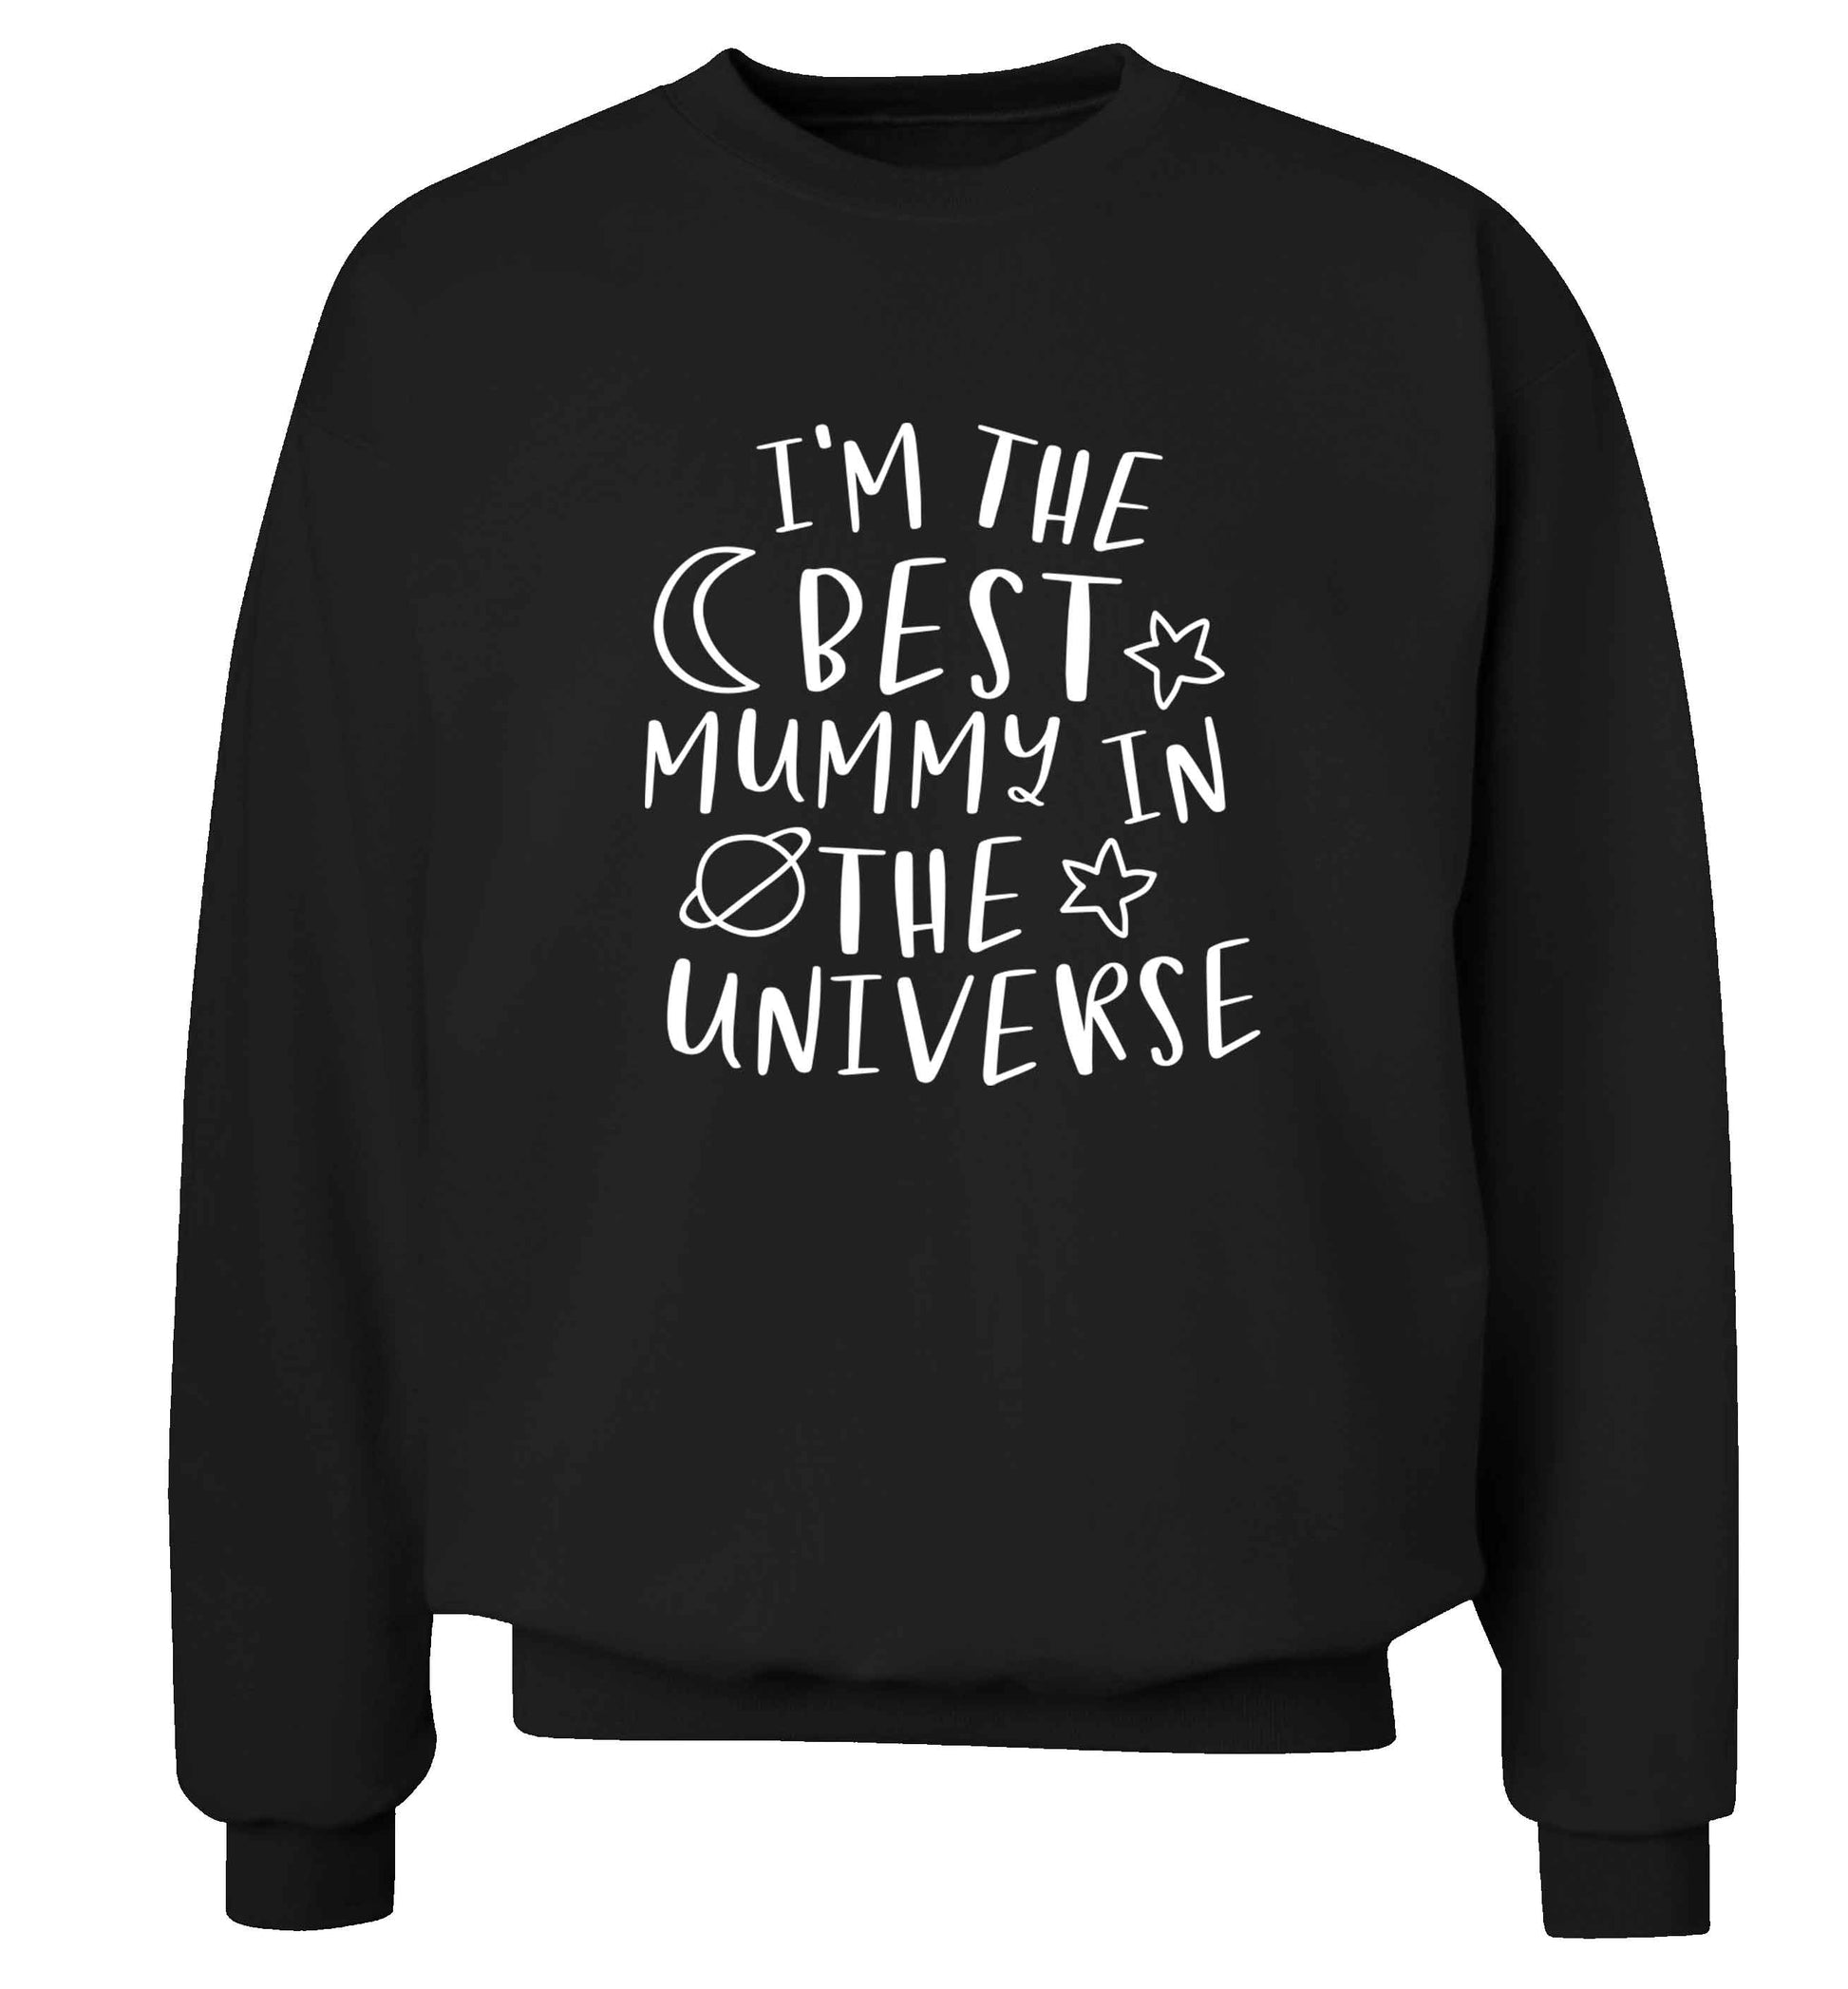 I'm the best mummy in the universe adult's unisex black sweater 2XL